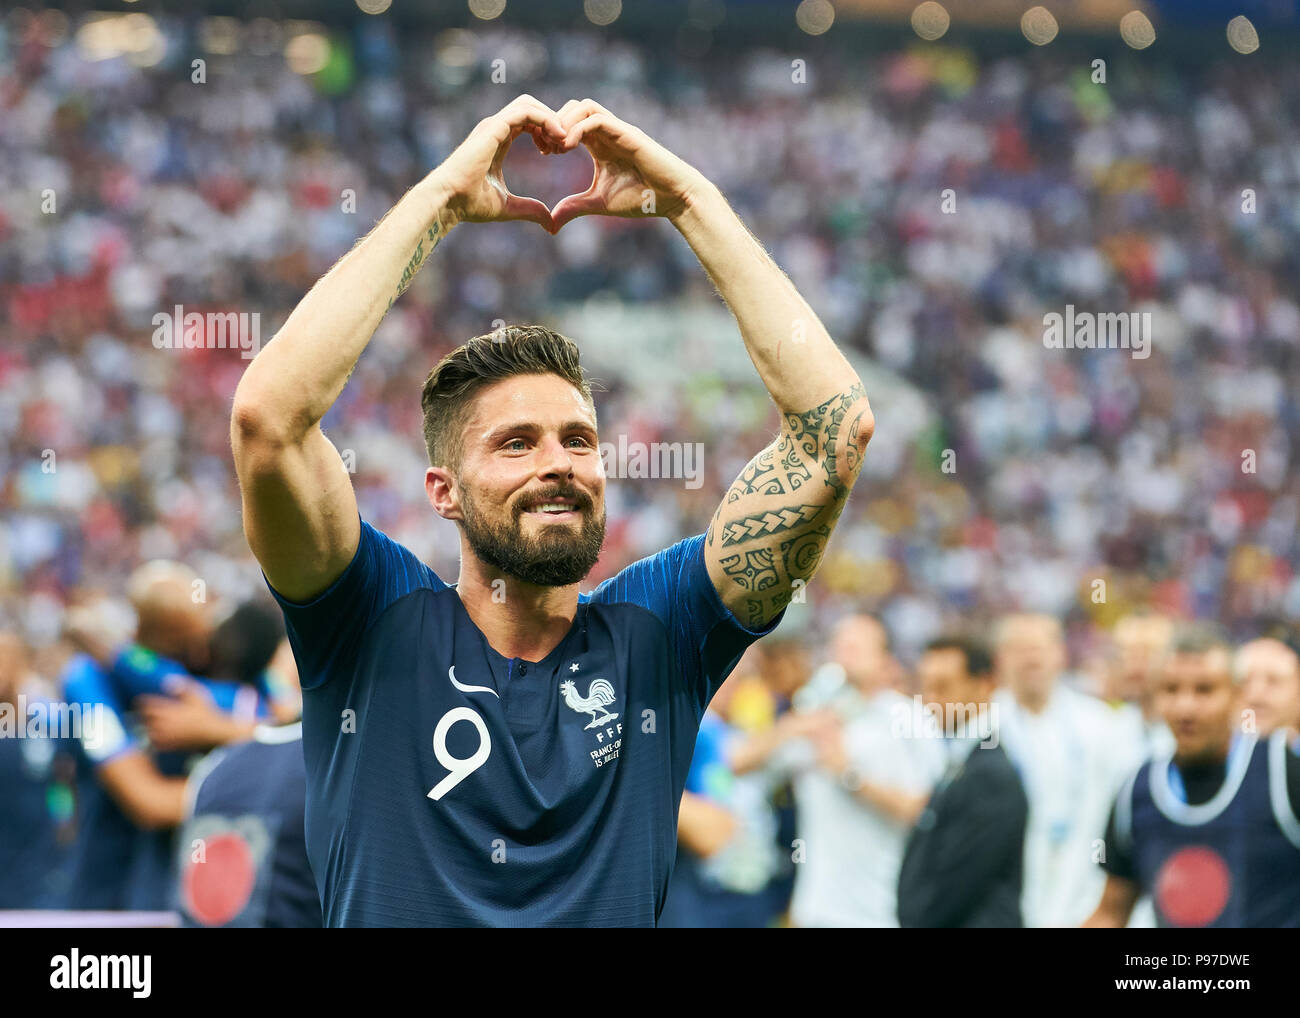 Moscow, Russia. 15th July 2018. Moscow, Russia. 15th July 2018.  Olivier GIROUD, FRA 9    the Official FIFA World Cup Original Trophy, winner, victory, ceremony,  FRANCE  - CROATIA 4-1 Football FIFA WORLD CUP 2018 RUSSIA, Final, Season 2018/2019,  July 15, 2018 in Luzhniki Stadium Moscow, Russia. © Peter Schatz / Alamy Live News Stock Photo